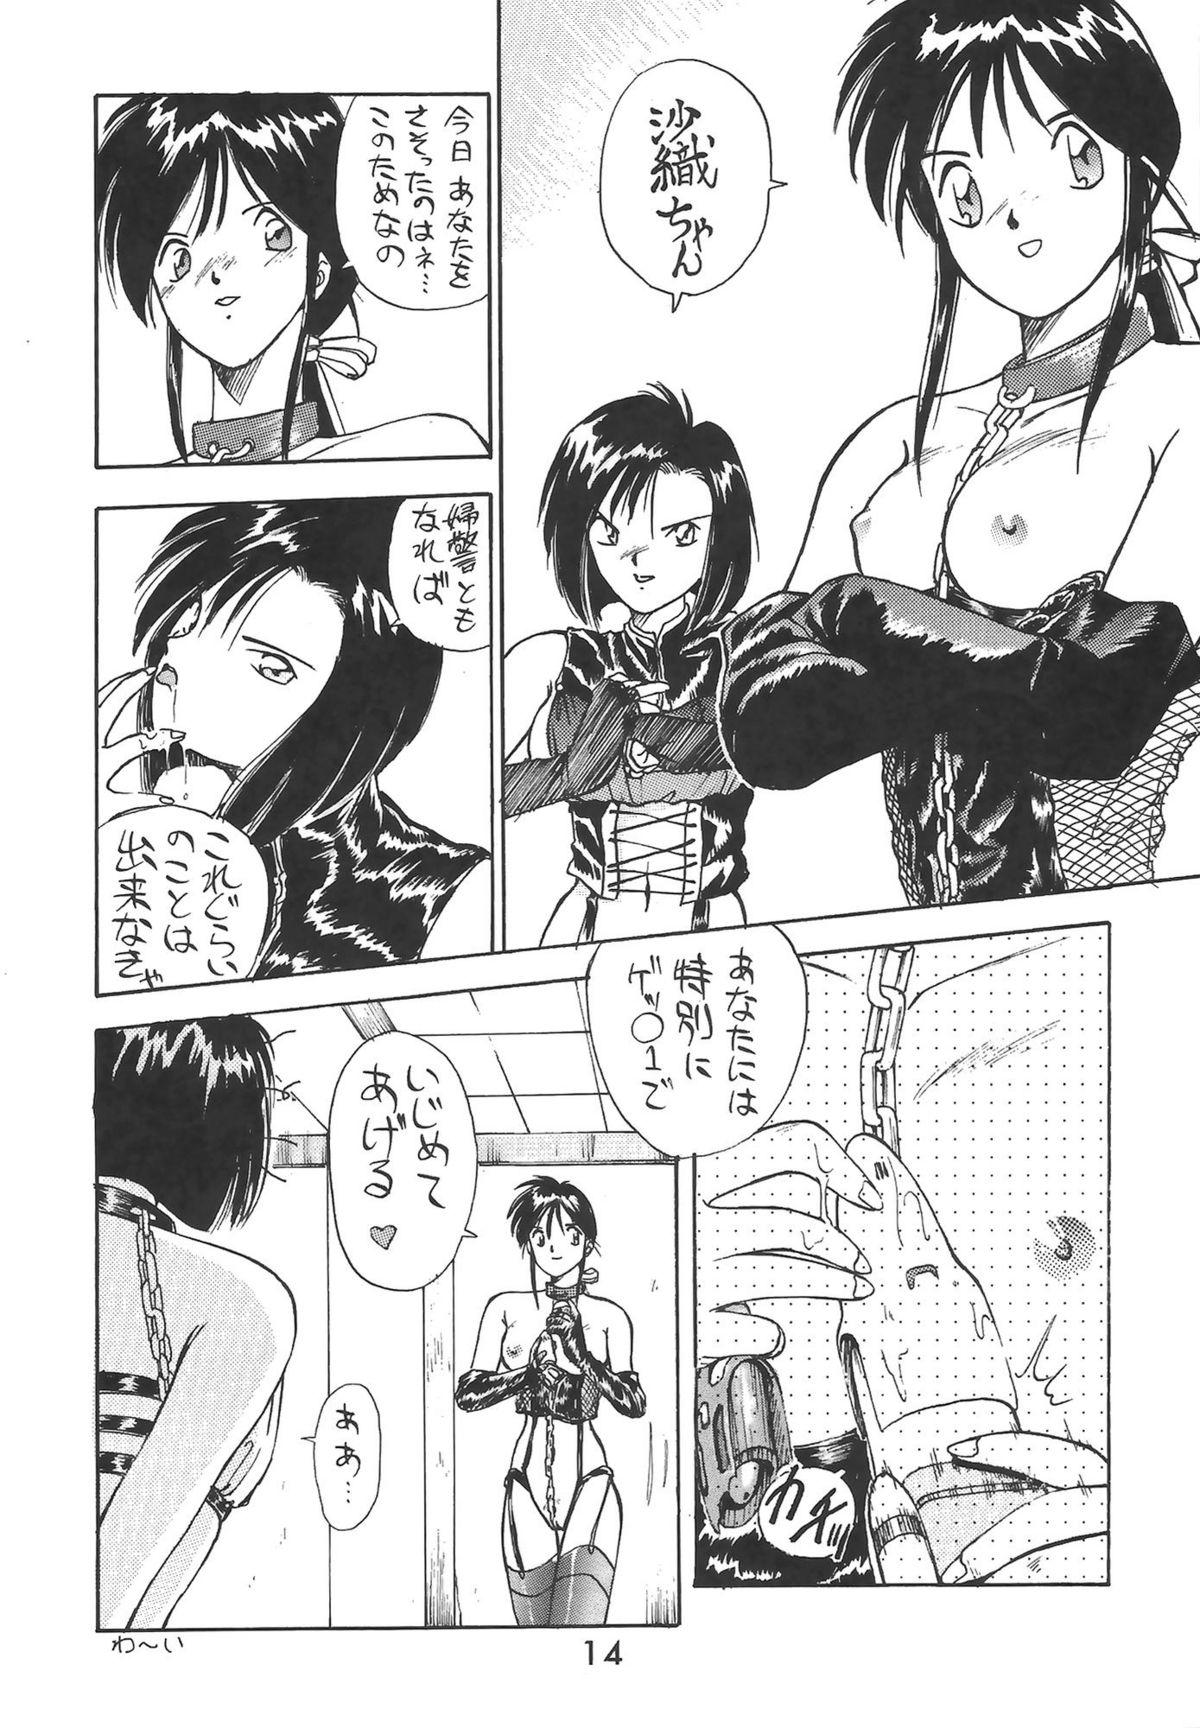 Pee Madonna Special 2 - Ah my goddess Youre under arrest Fuck - Page 14